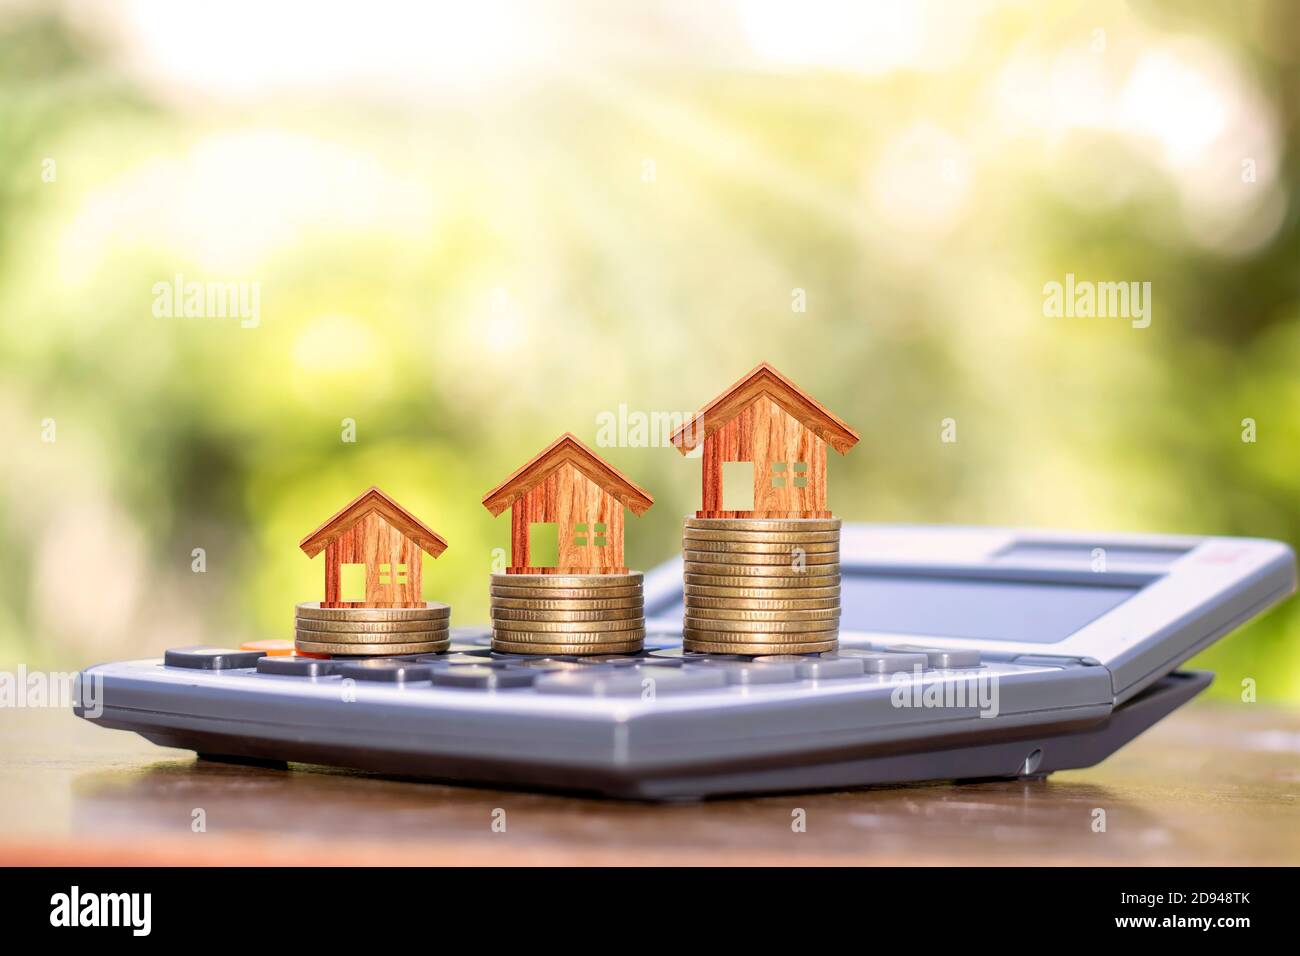 Wooden house designs on coins, including real estate investment ideas calculator. Stock Photo